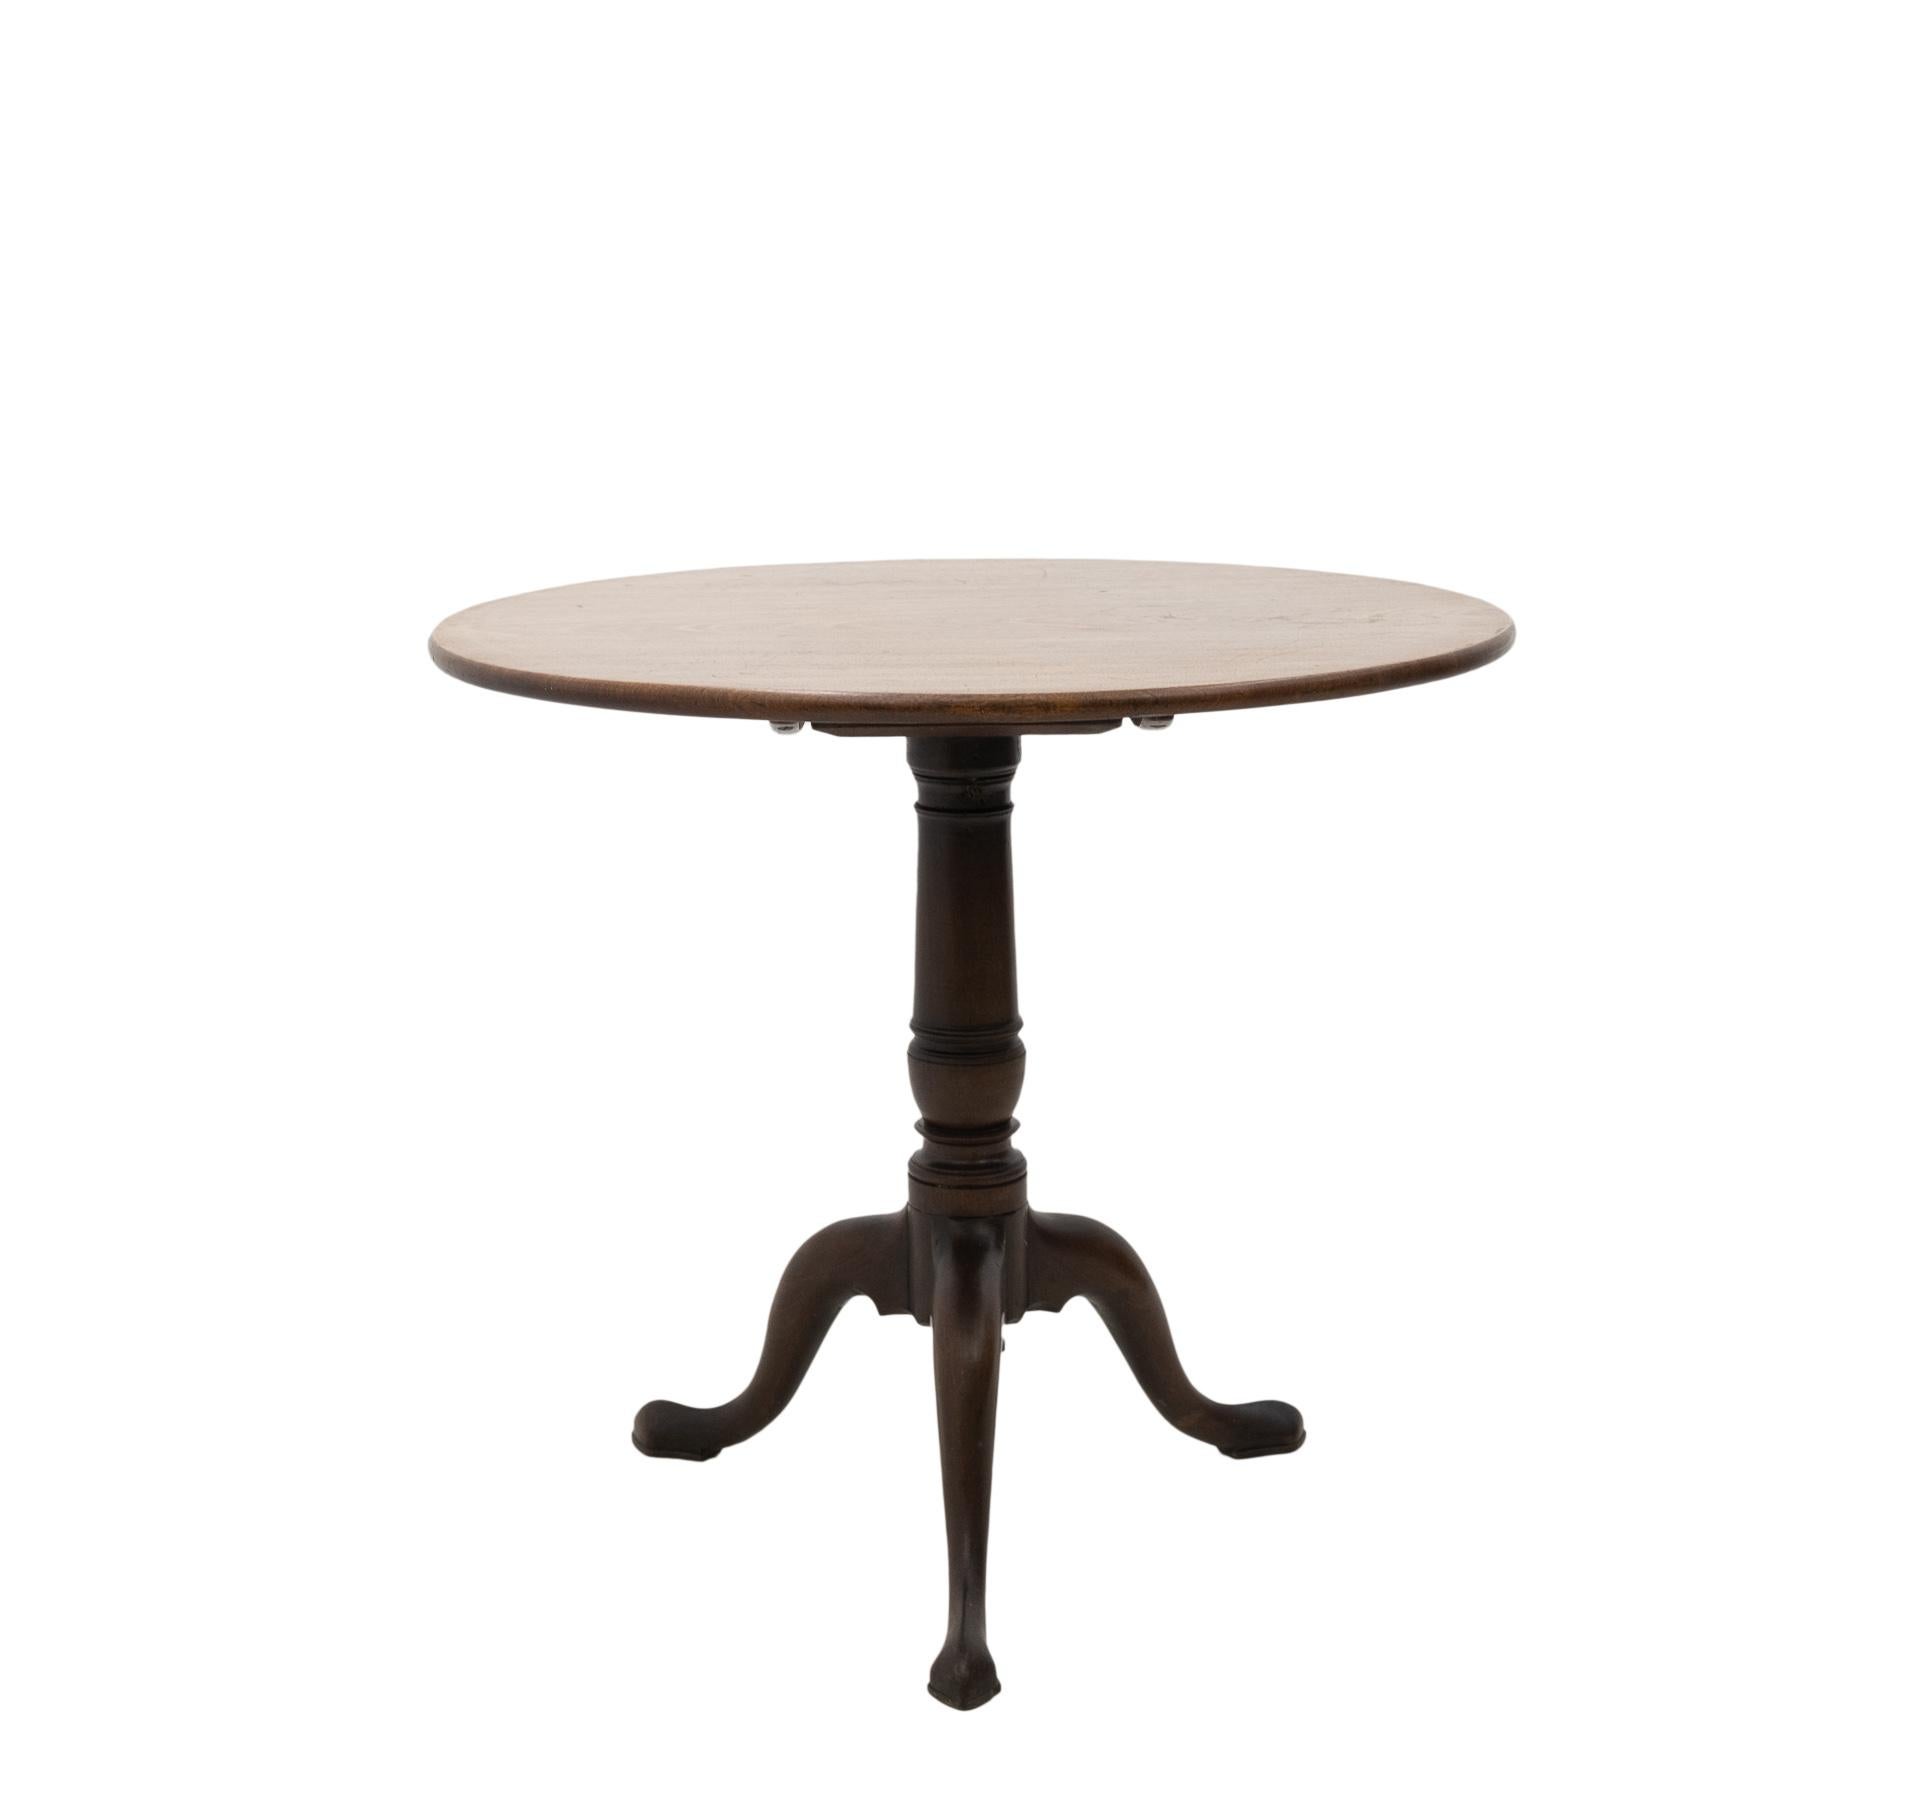 Antieke Ronde Bijzettafel

Beautiful aged mahogany side table in perfect and original condition. It is a tilt-top table. This means that the top can be folded up. Originally this was made because the table was only used for visitors. When the